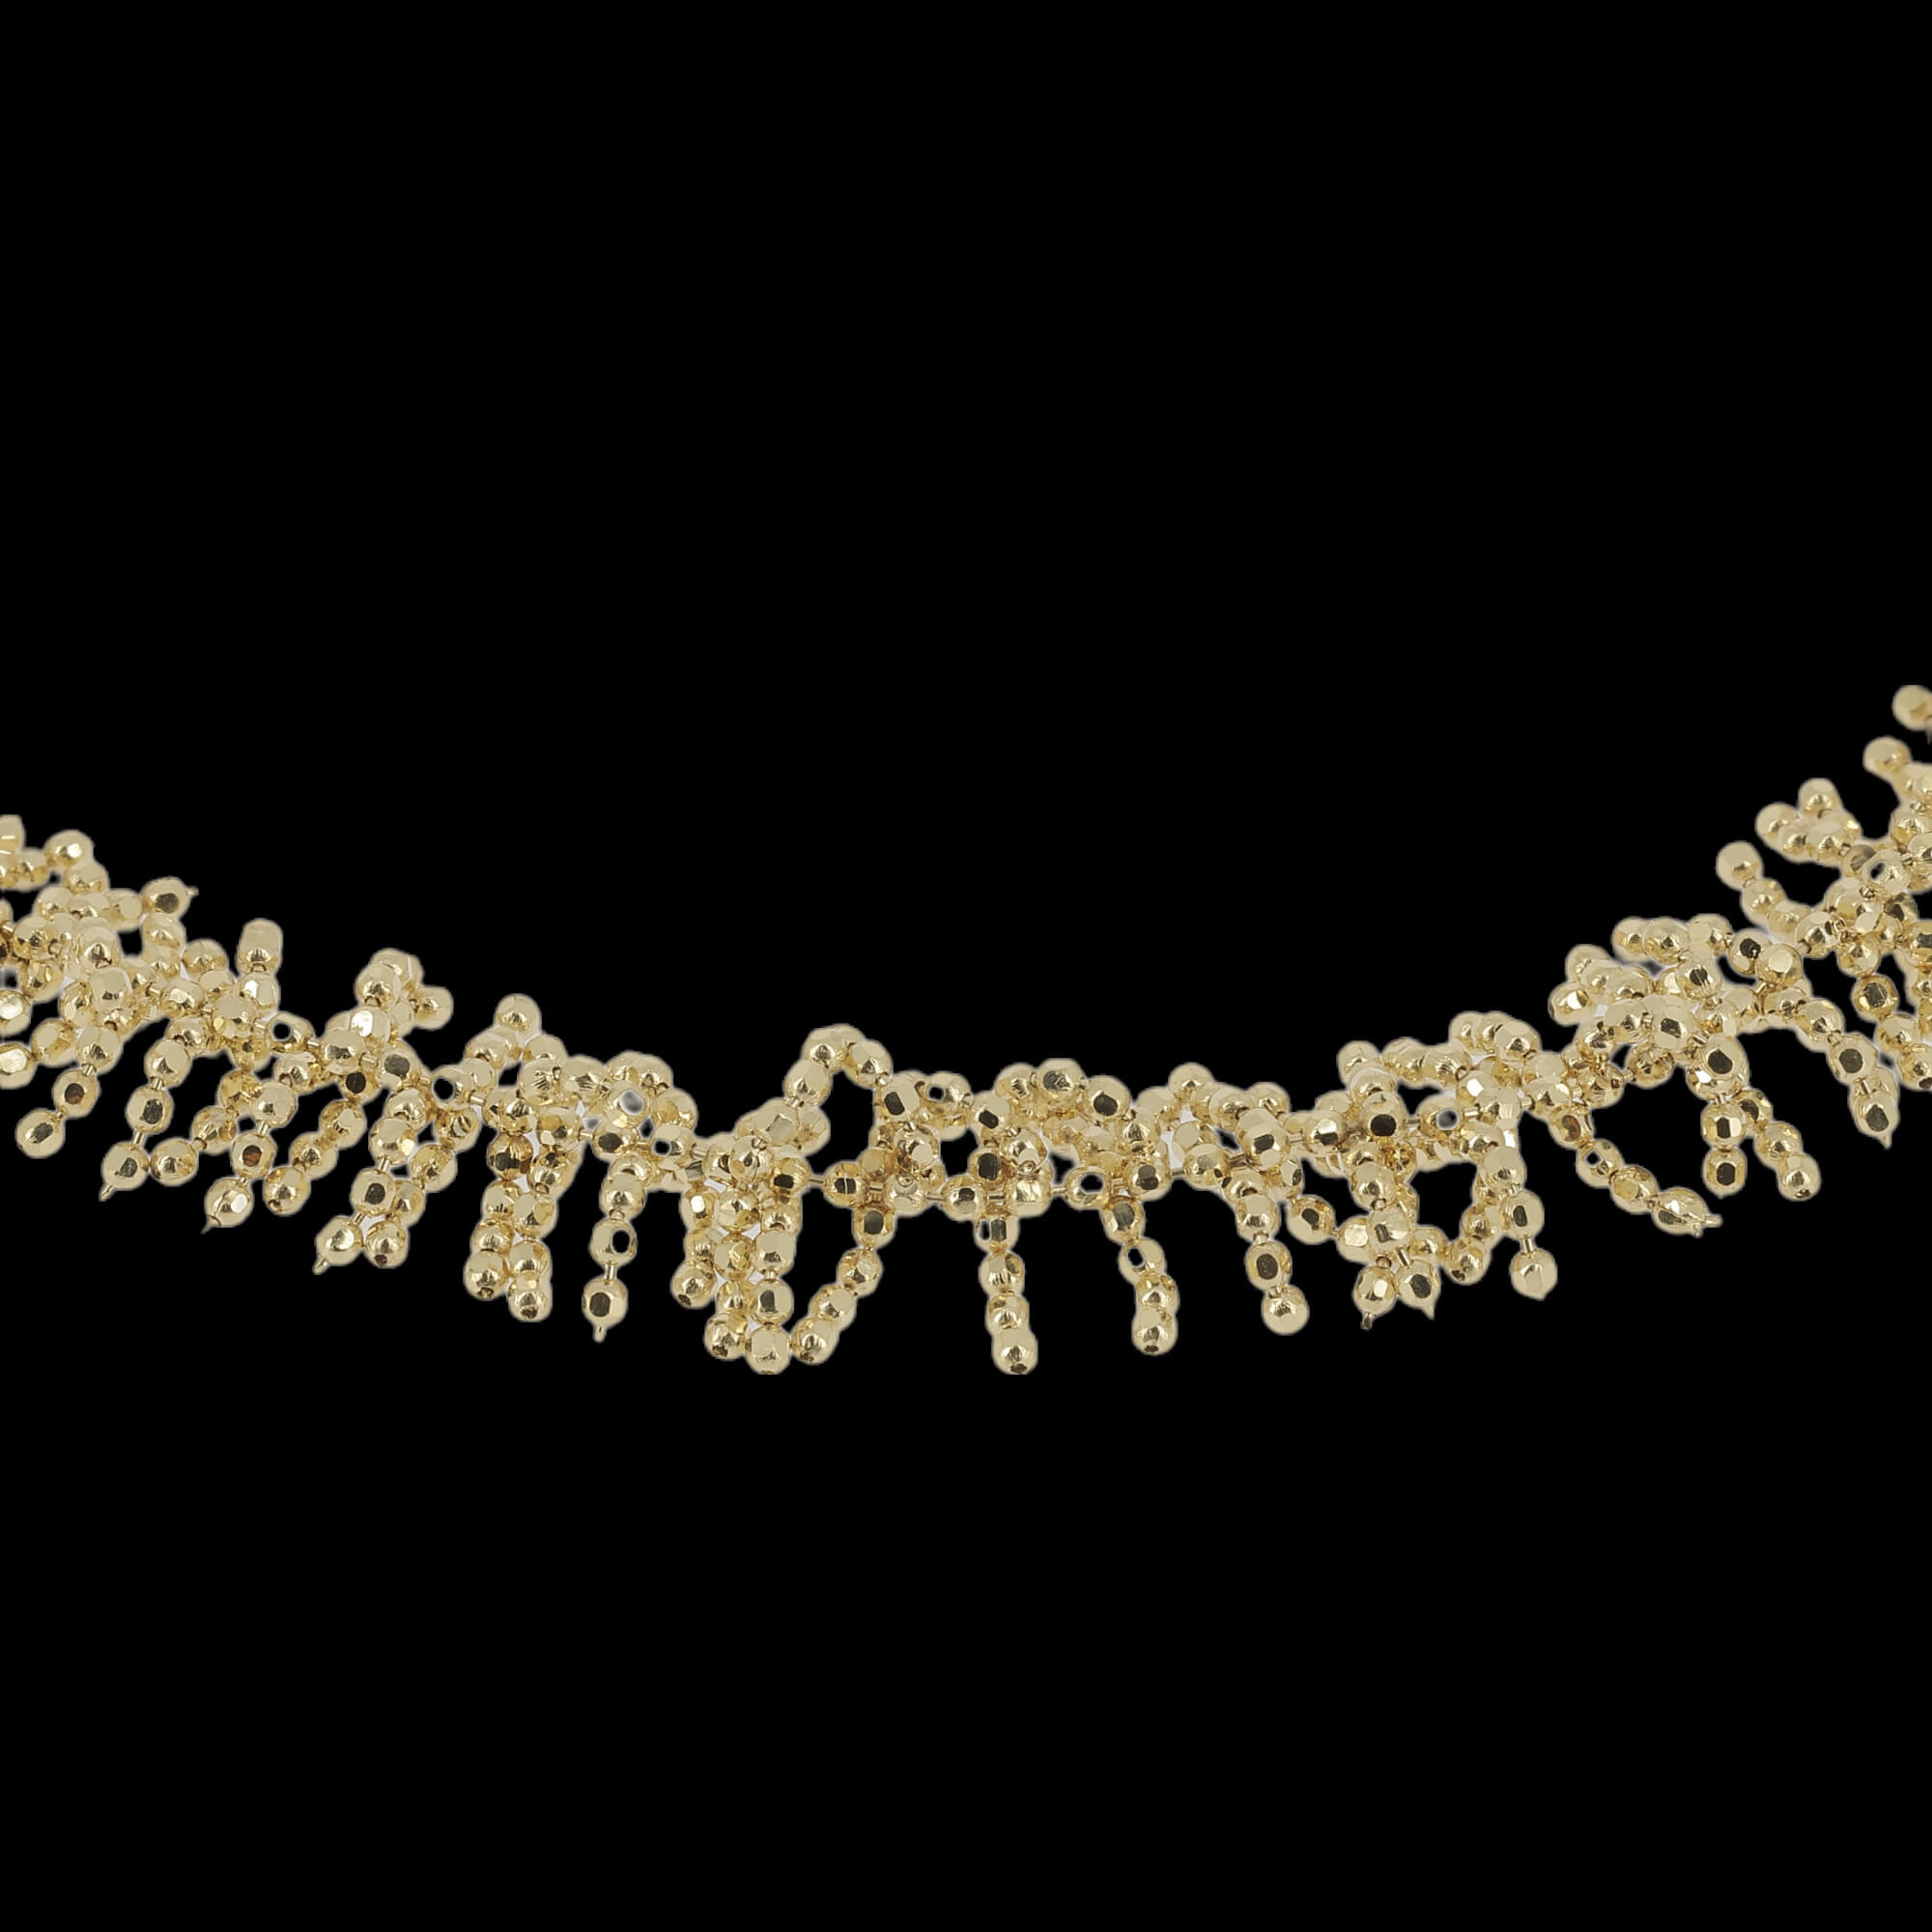 Wider bracelet with refined branches of 18ct gold